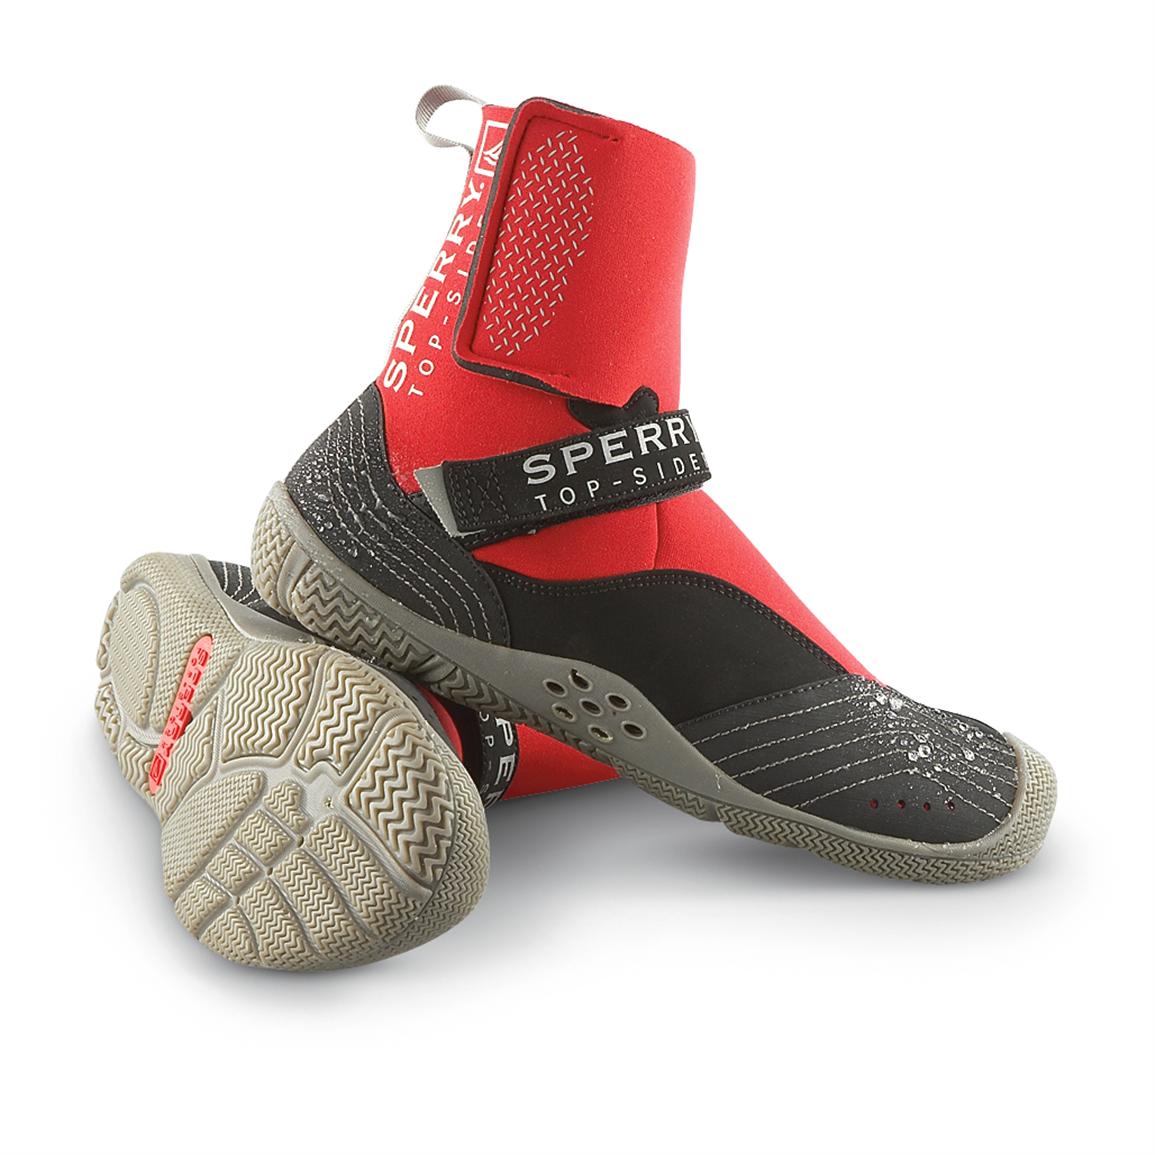 Sider® Submersible Water Shoes 